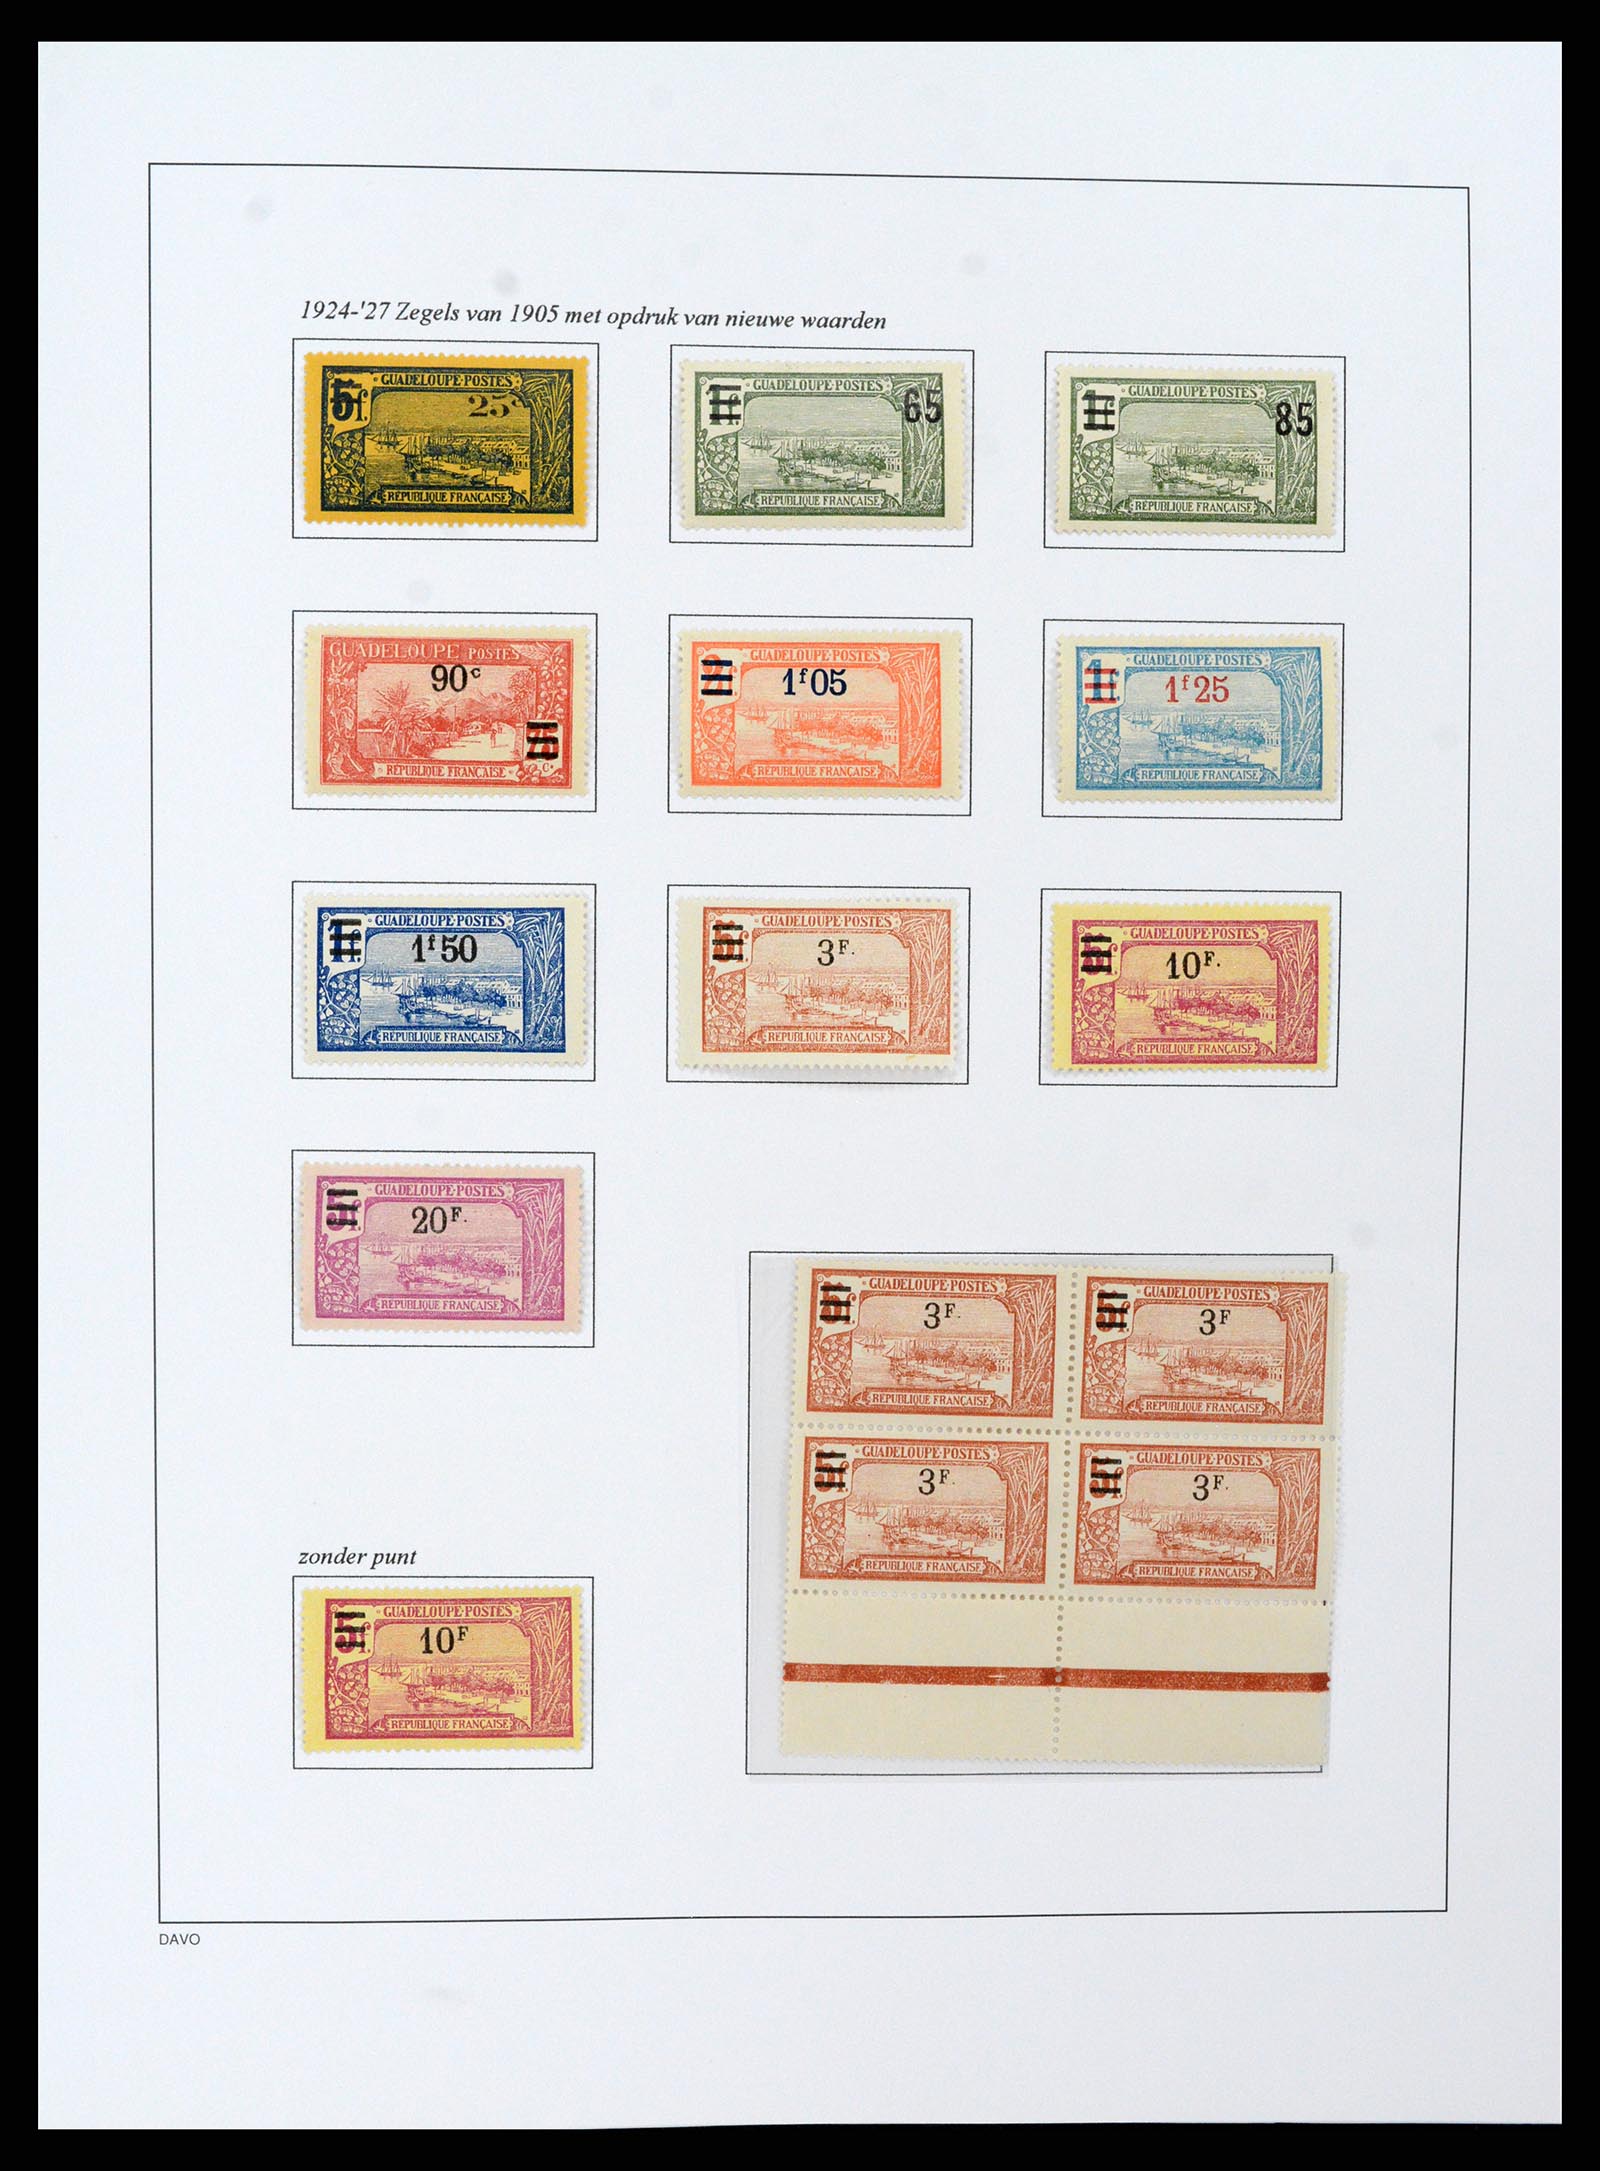 37480 056 - Stamp collection 37480 Guadeloupe supercollection 1823-1947.